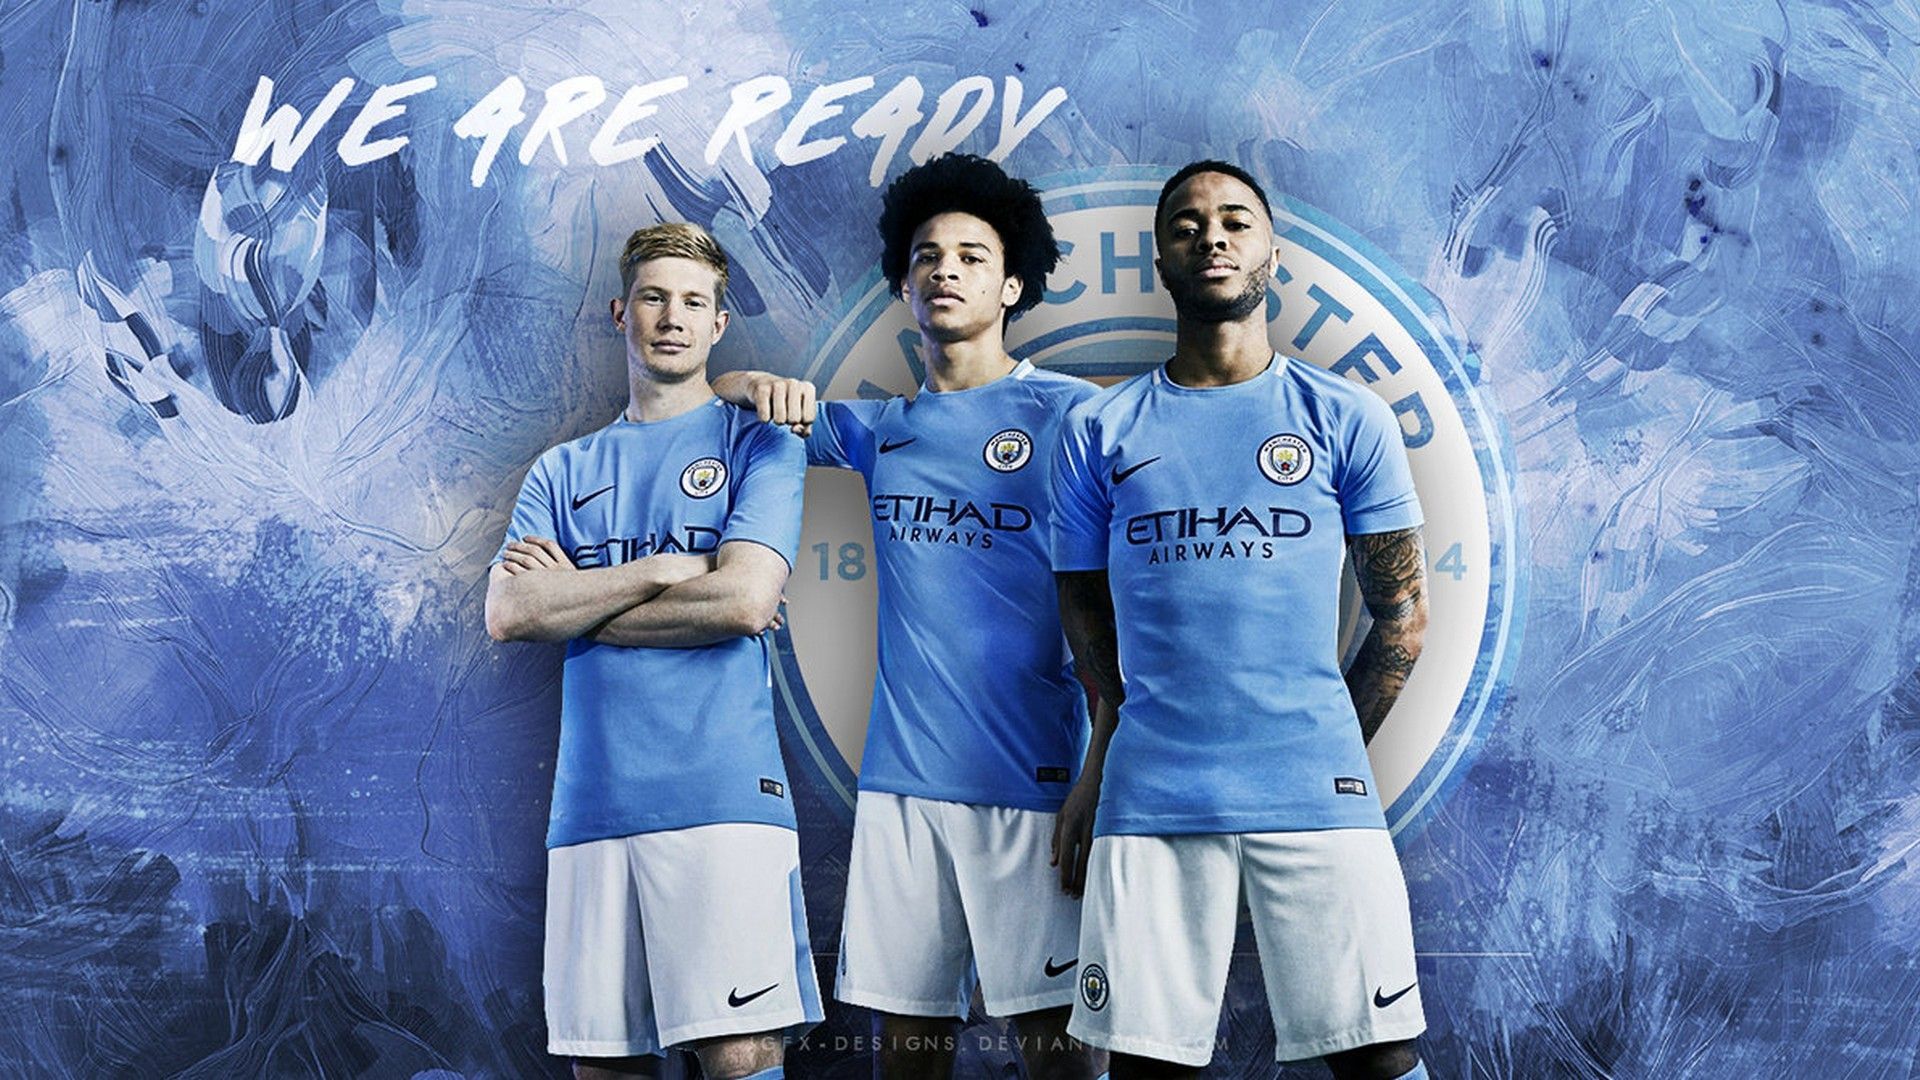 Manchester City Wallpaper For Mac Background. Best Football Wallpaper HD. Manchester city wallpaper, Football wallpaper, City wallpaper